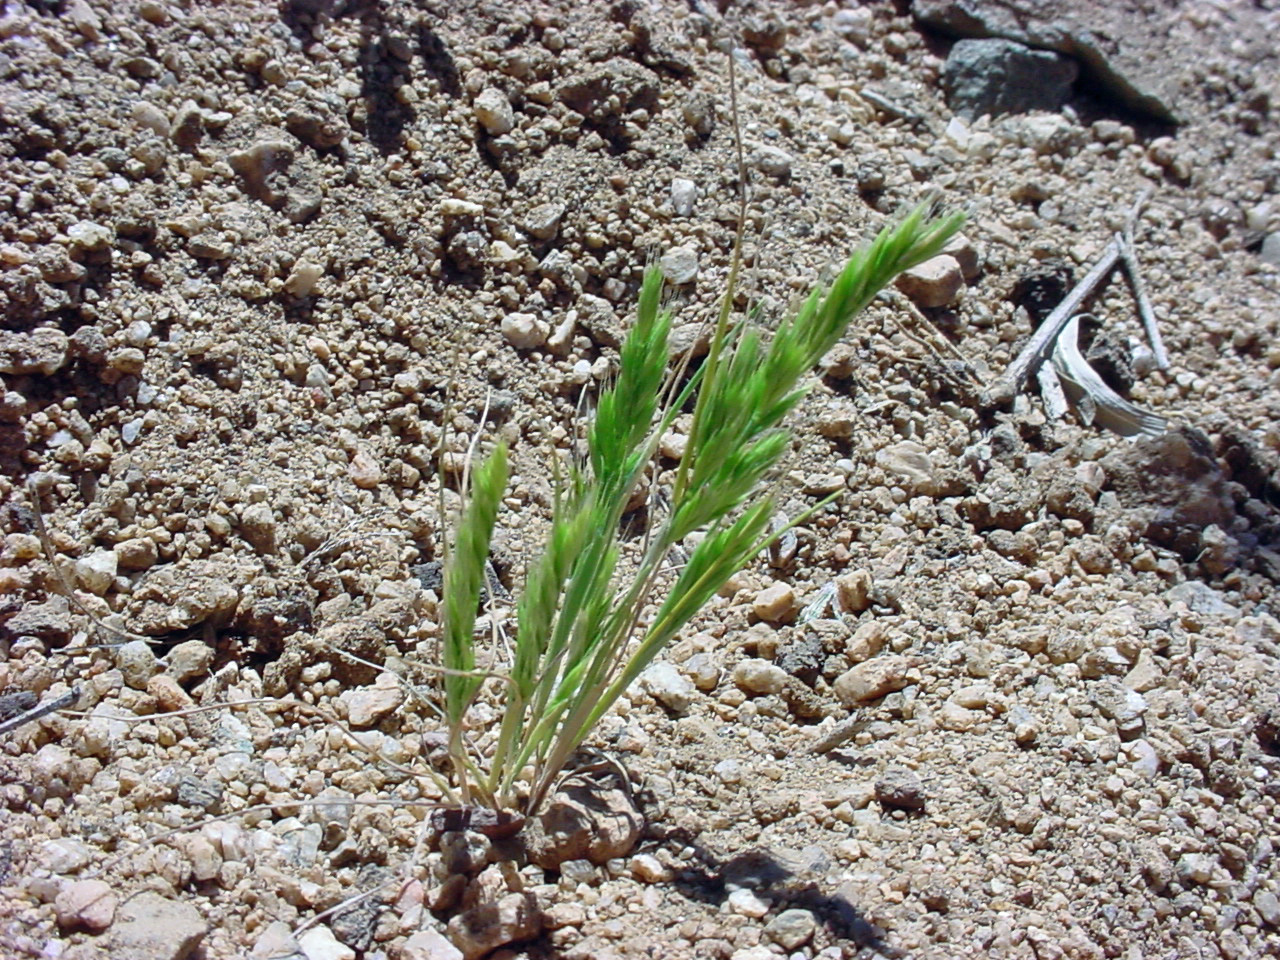 Growth habit of a small specimen with many seeds.